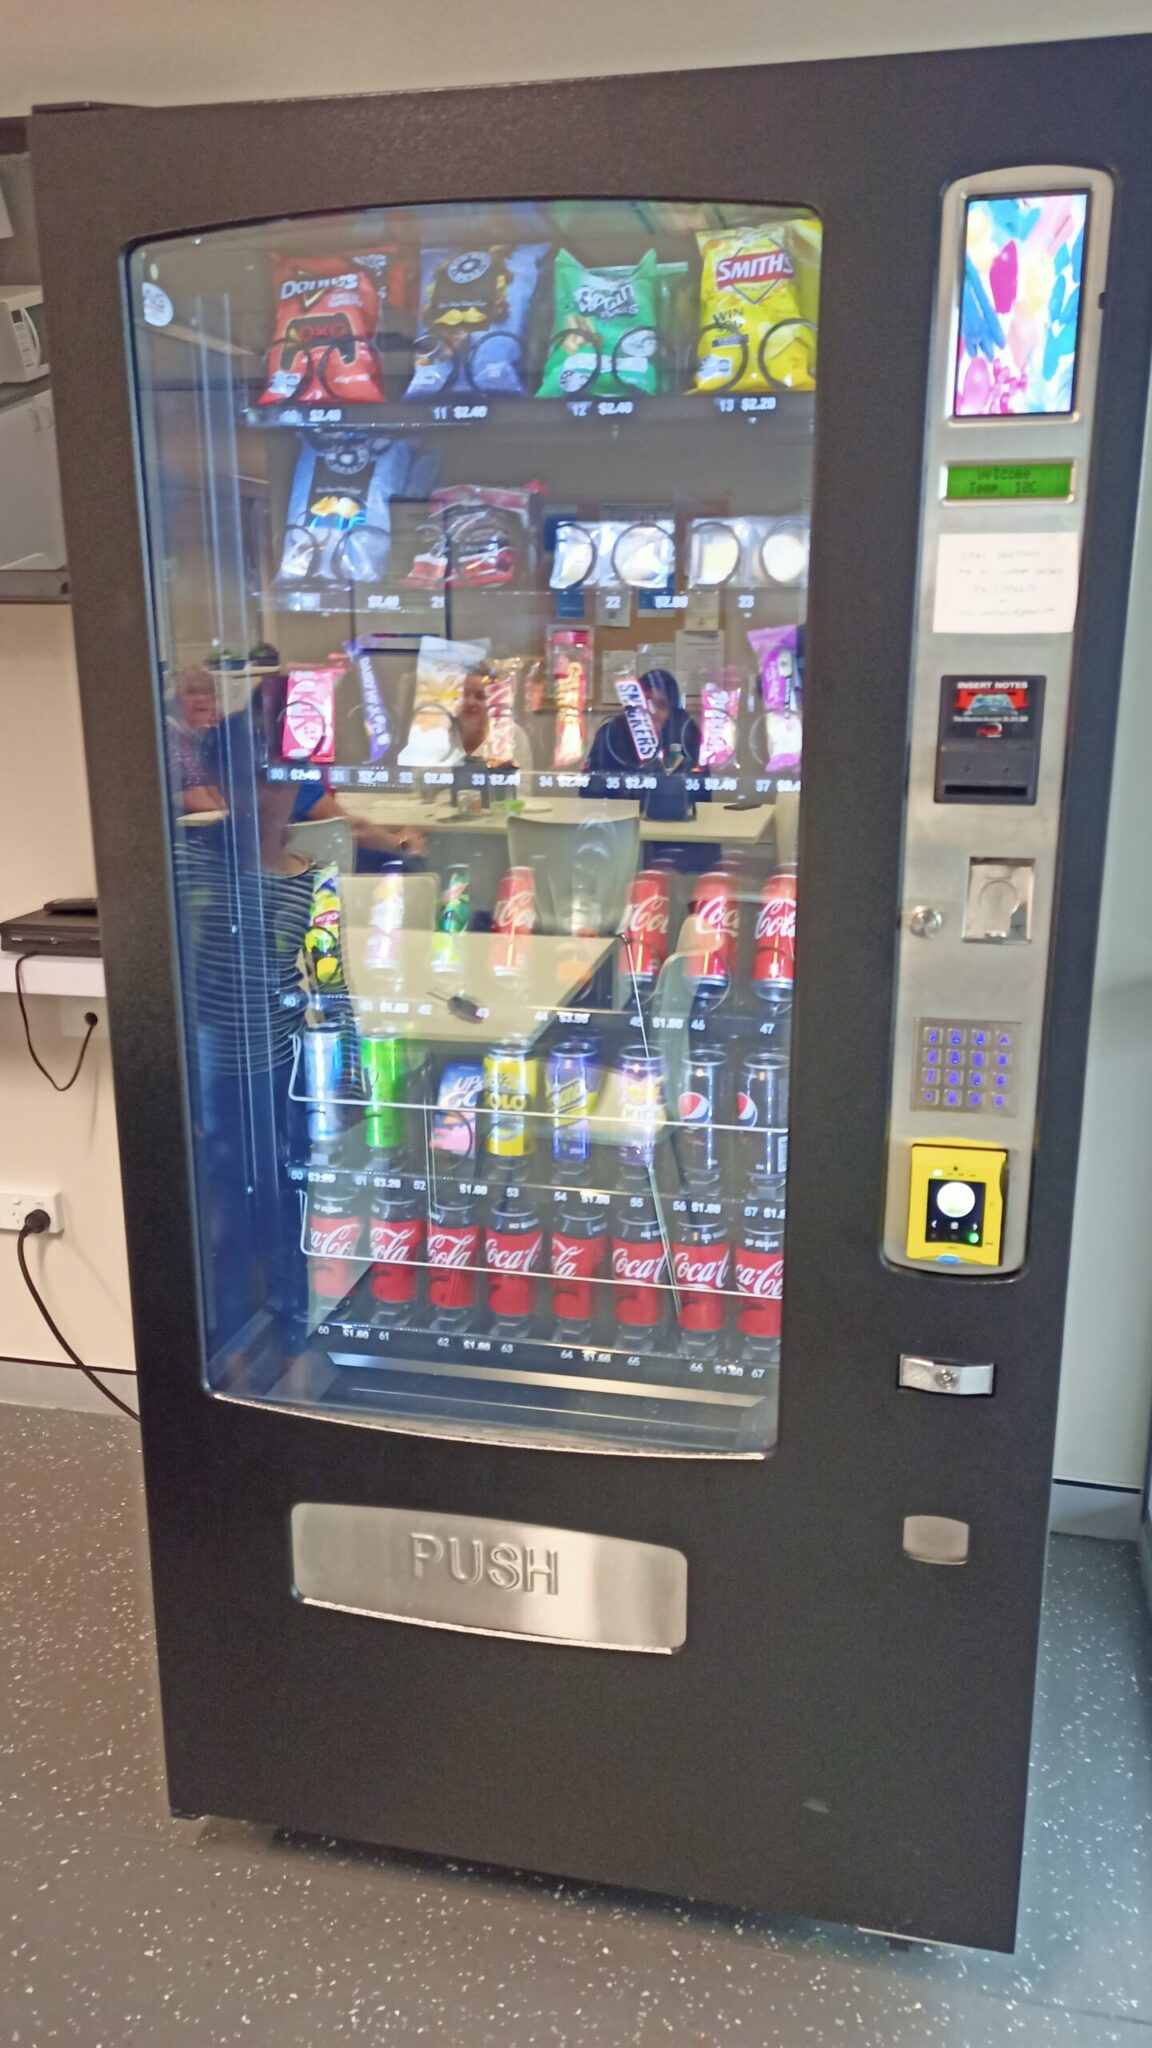 6 Vending machines for sale